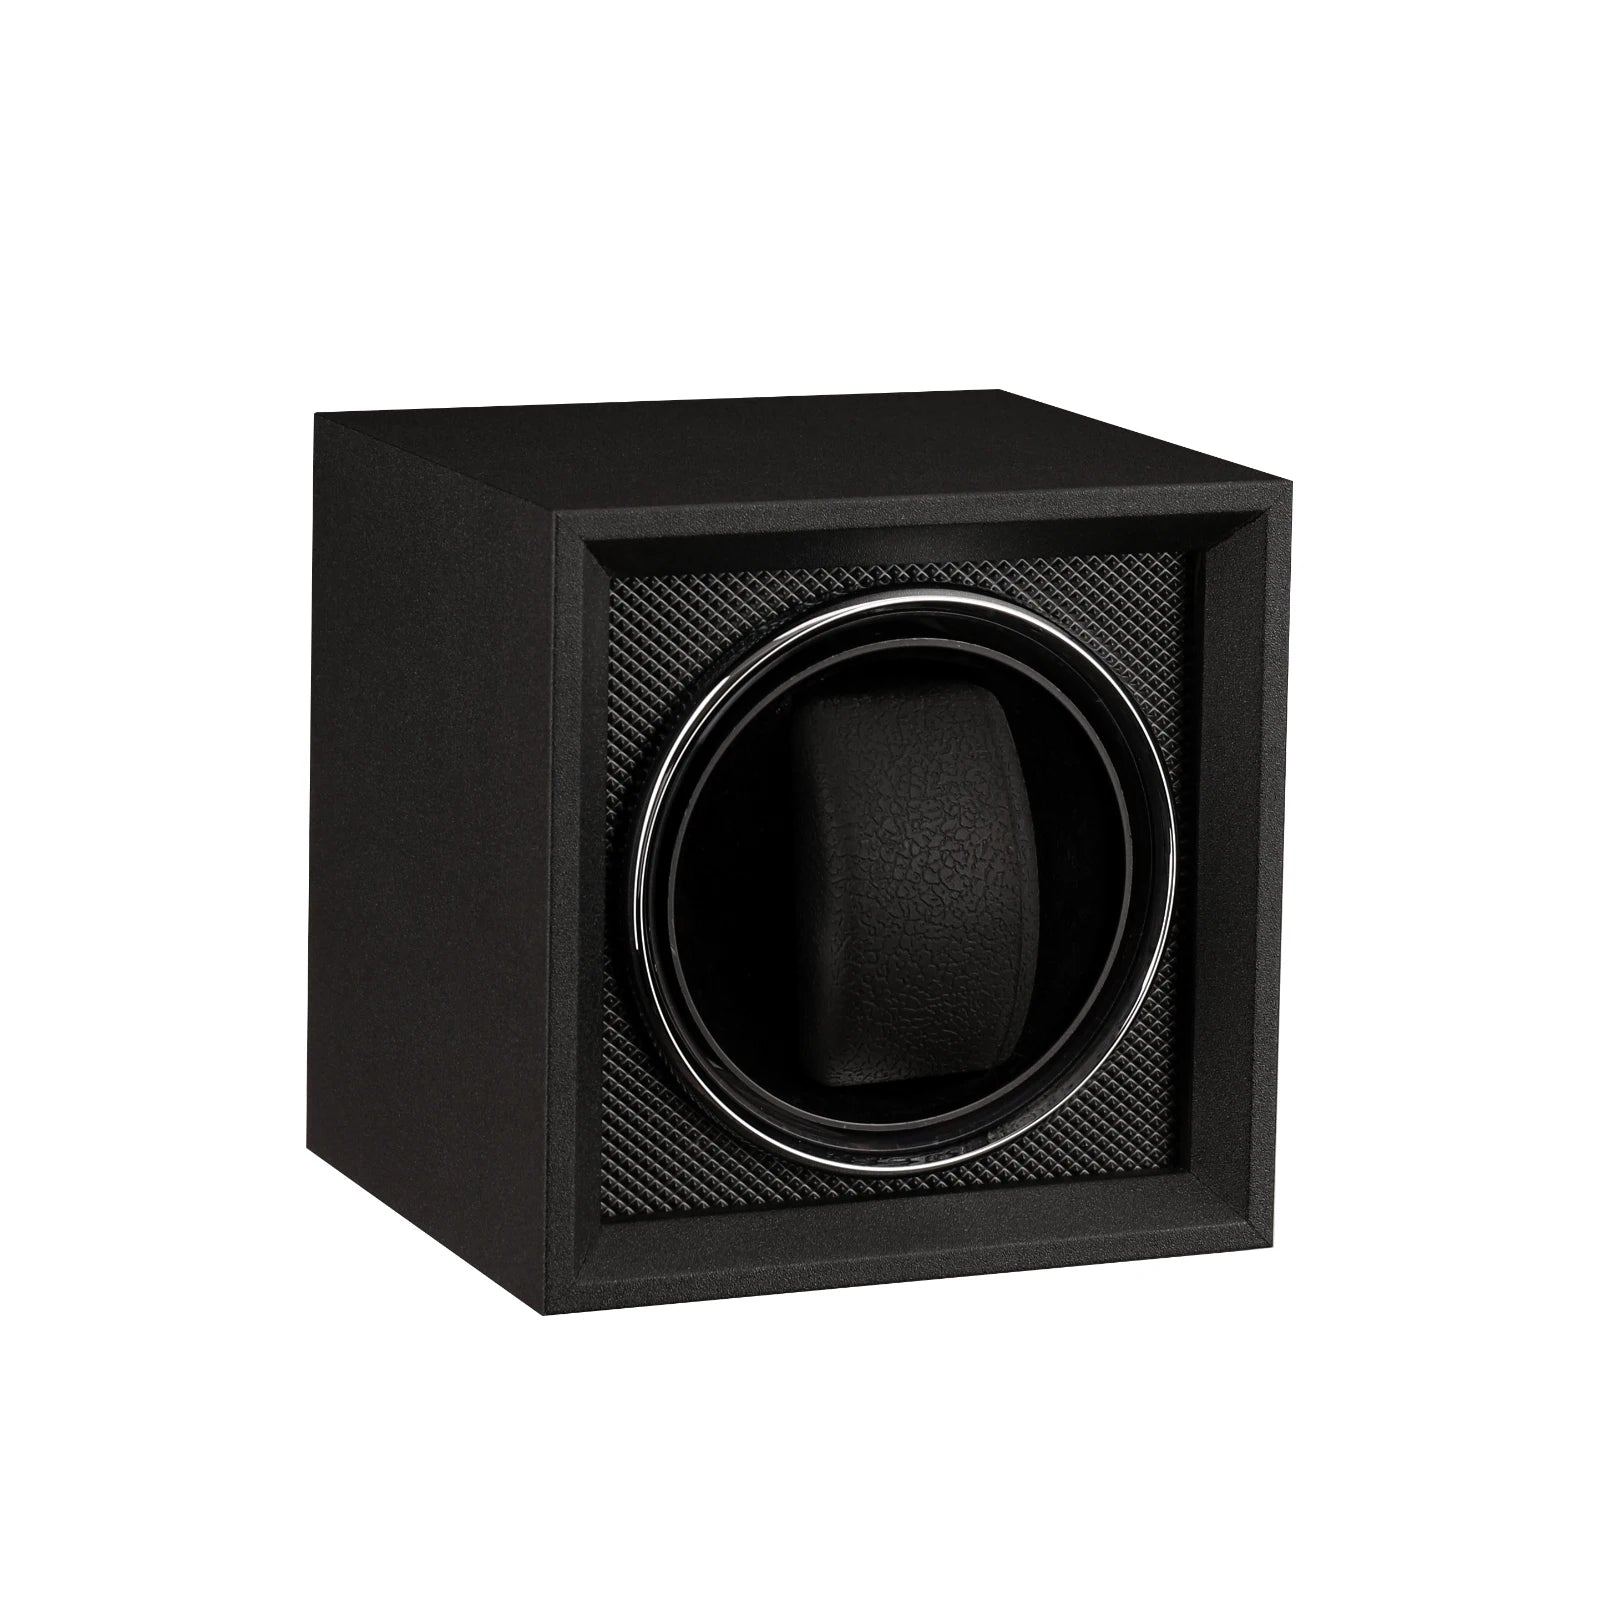 Raven Cube Watch Winder (for an American audience)-1-Le Remontoir